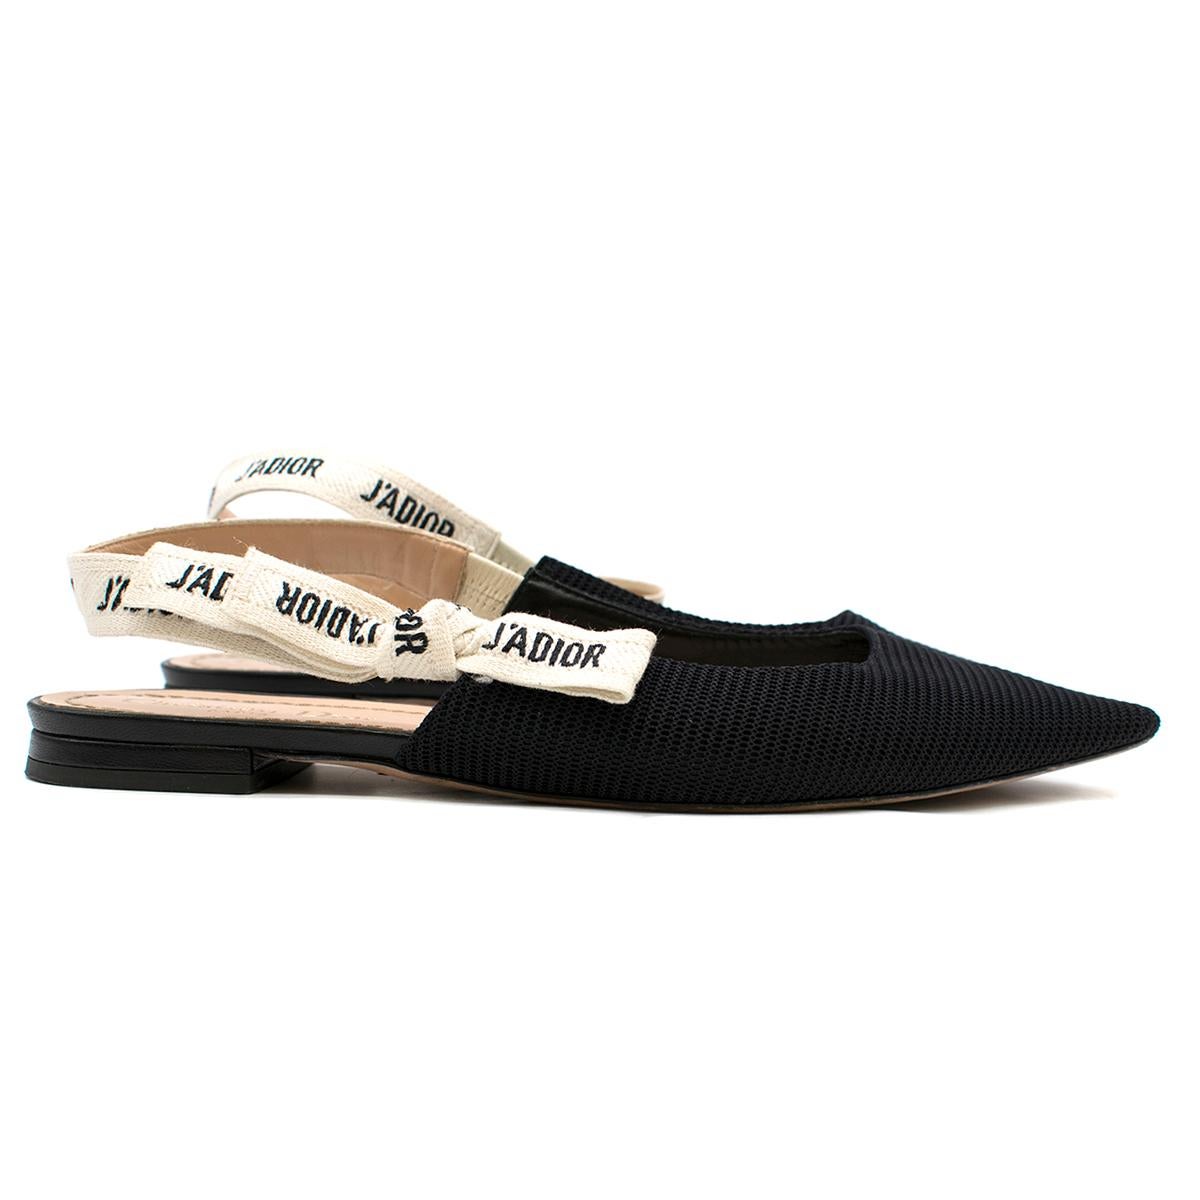 Dior Black Technical Canvas J'Adior Slingback Ballerina Flats

- Stretch sling-back ballet pumps in black technical canvas fabric
- White and black logo-embroidered bow ribbon
- Point-toe
- Leather sole with star accessory
- Low heel 

Please note,